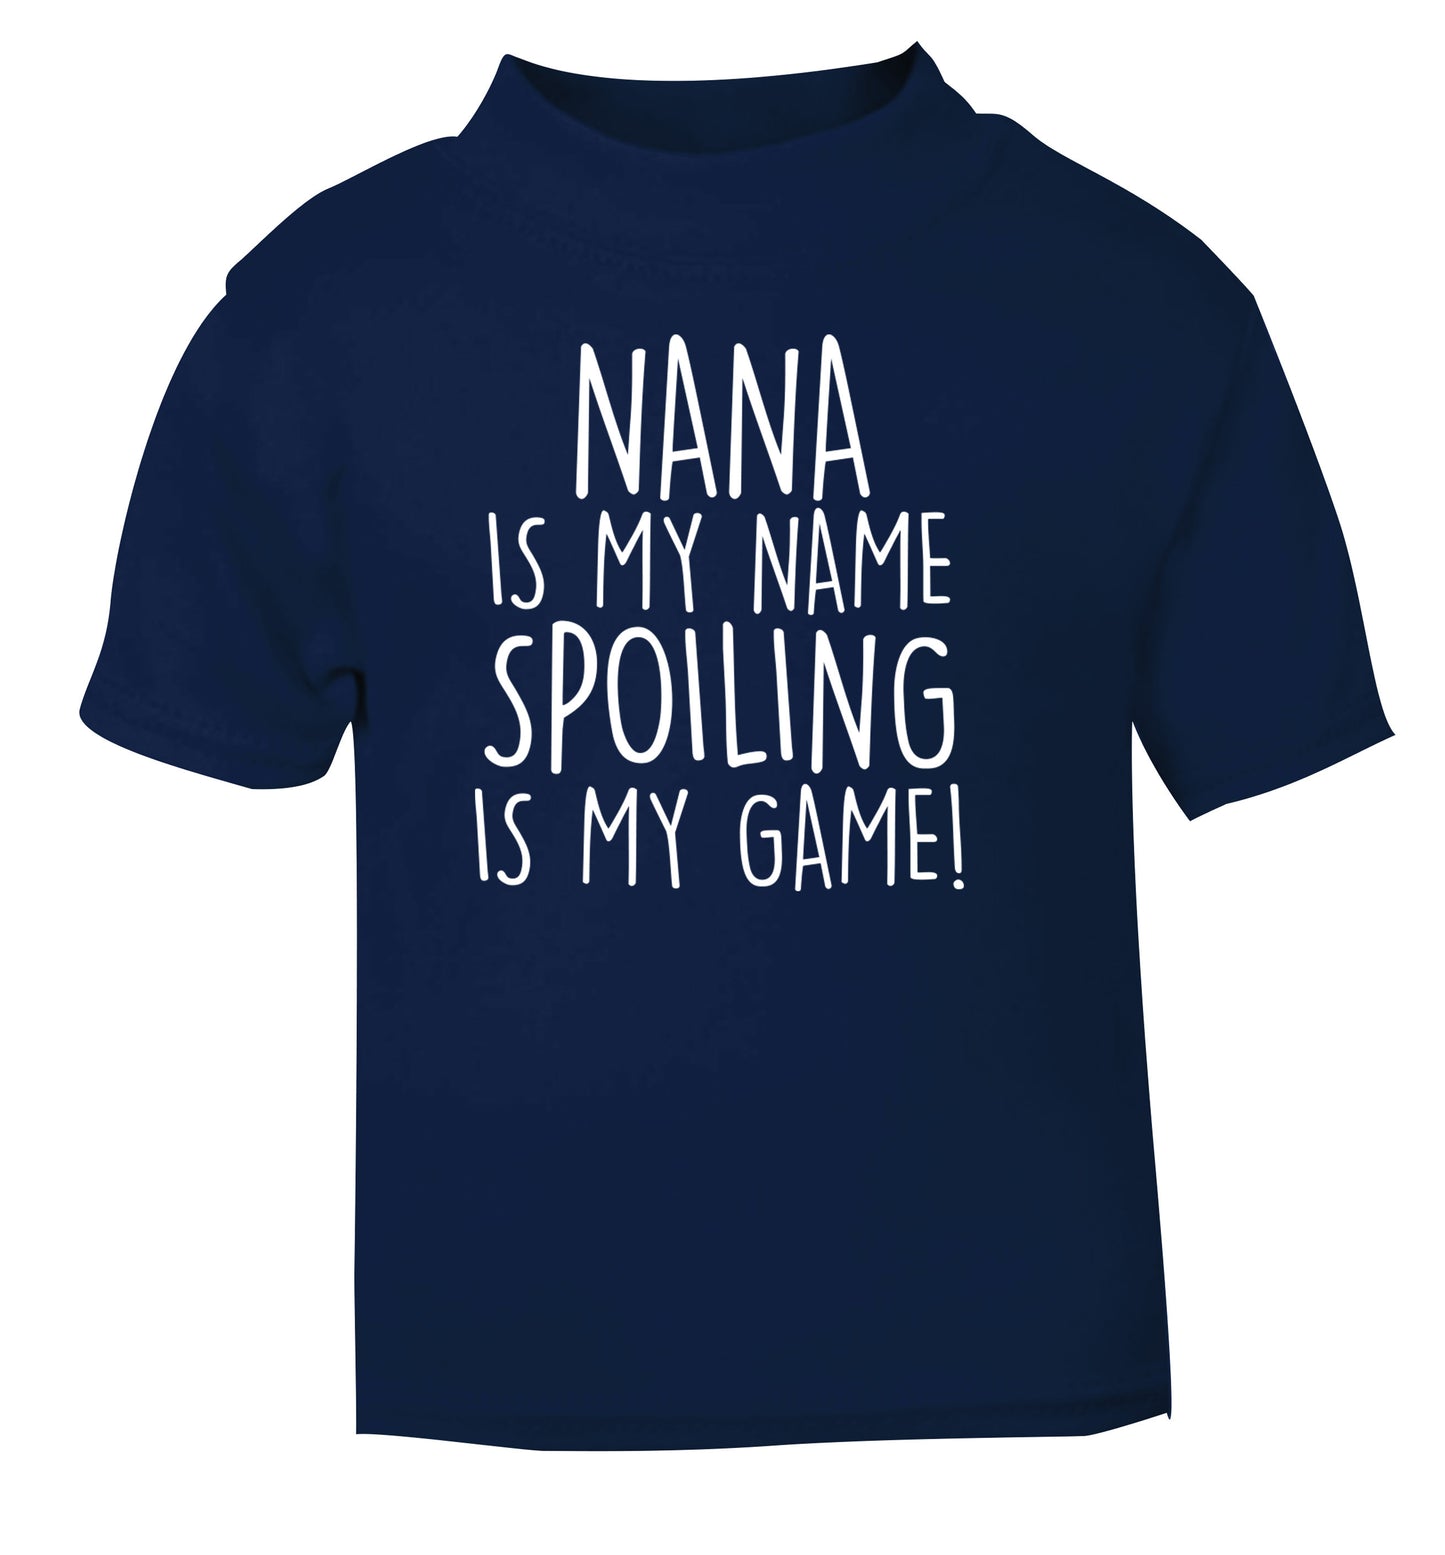 Nana is my name, spoiling is my game navy Baby Toddler Tshirt 2 Years